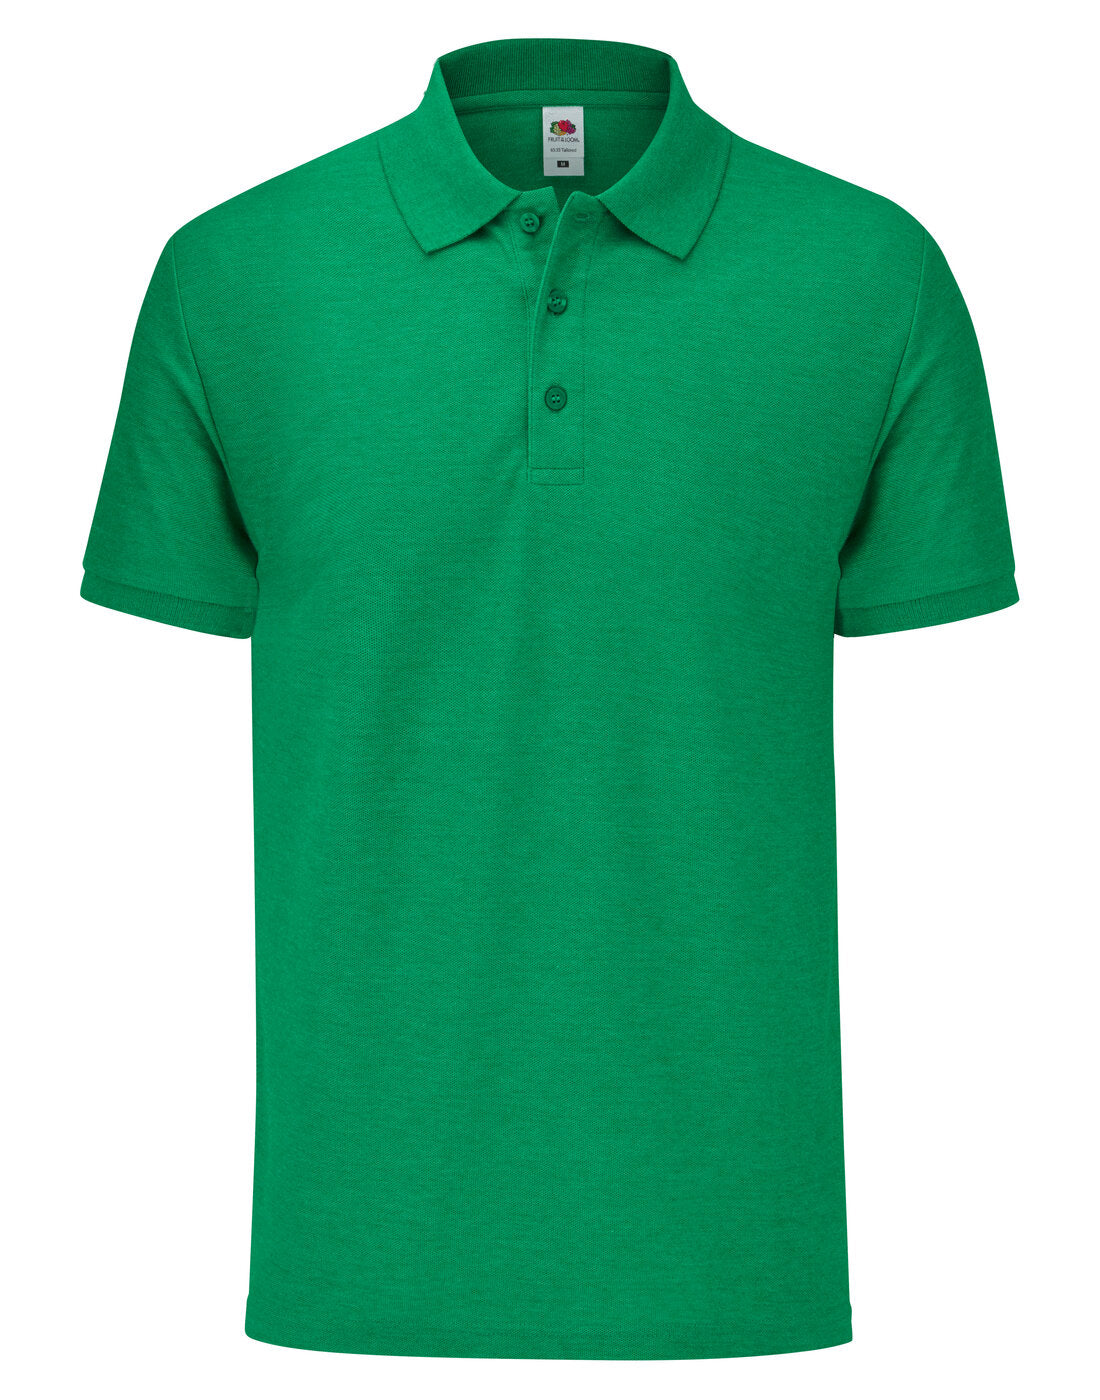 Fruit of the Loom 65/35 Tailored Fit Polo - Retro Heather Green